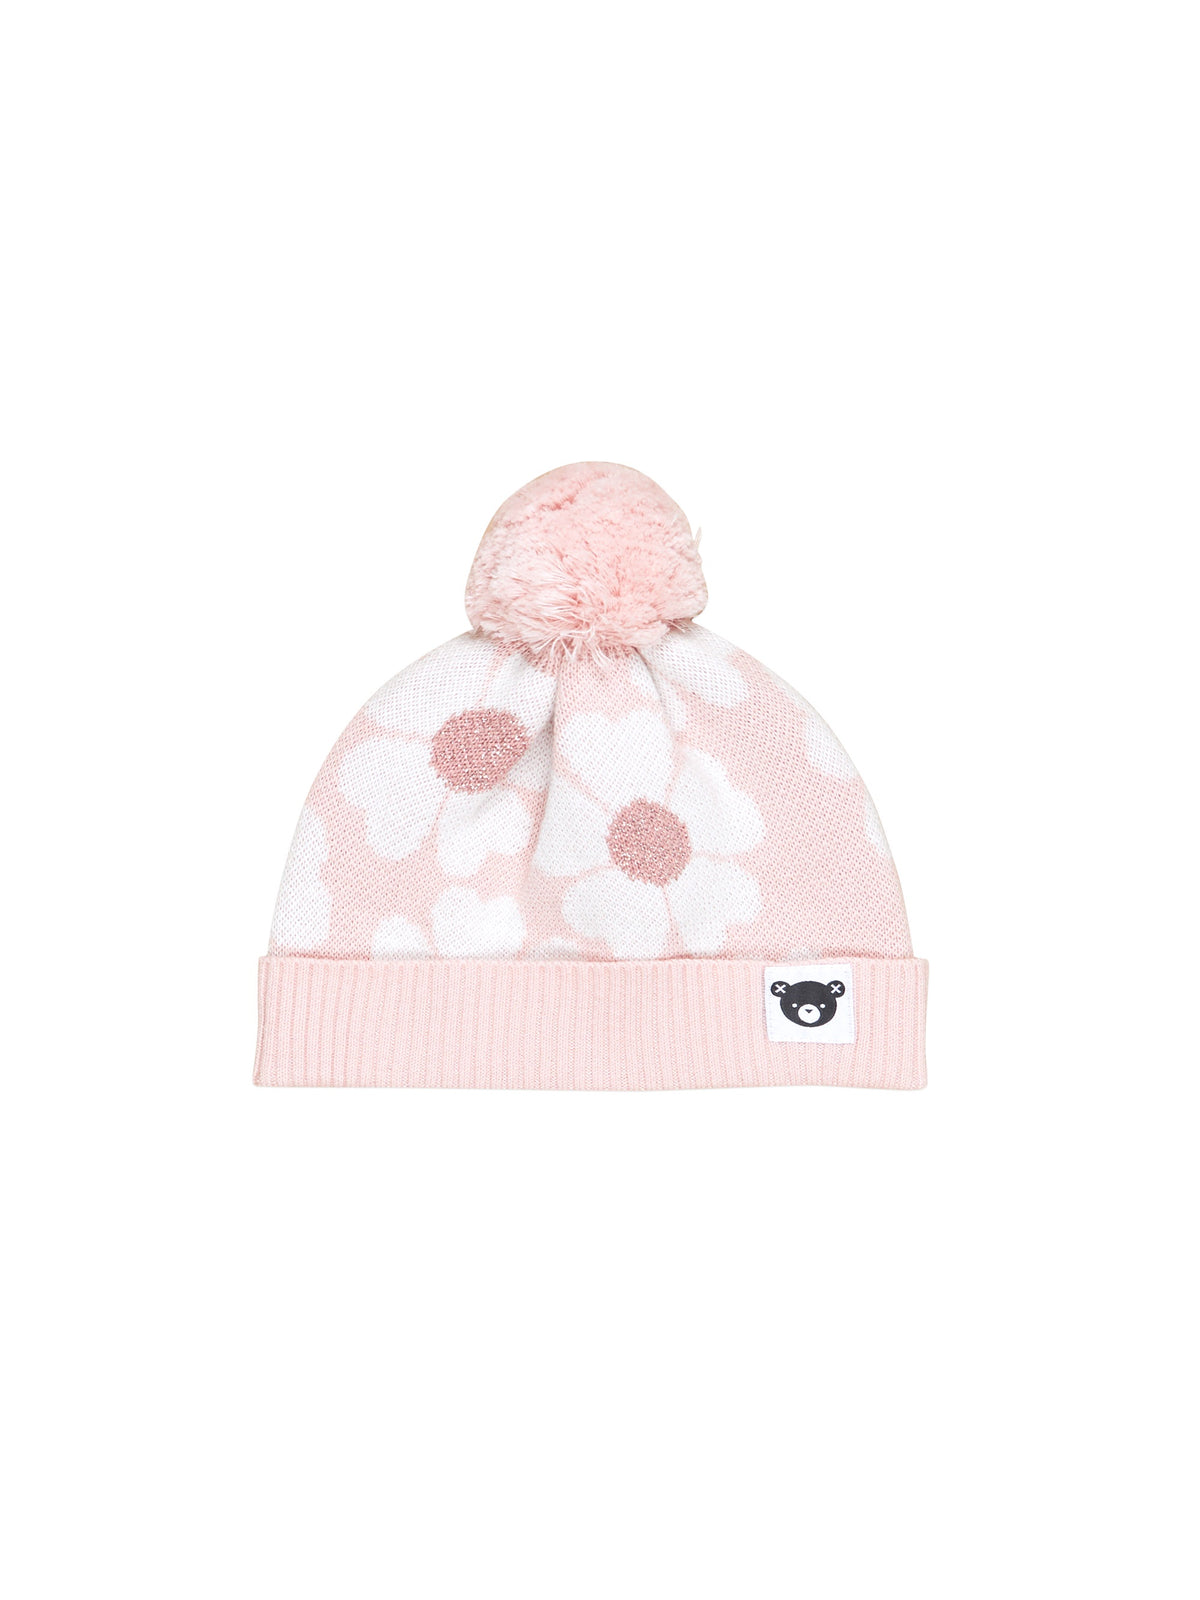 Huxbaby Blossom Knit Beanie Pink Pearl